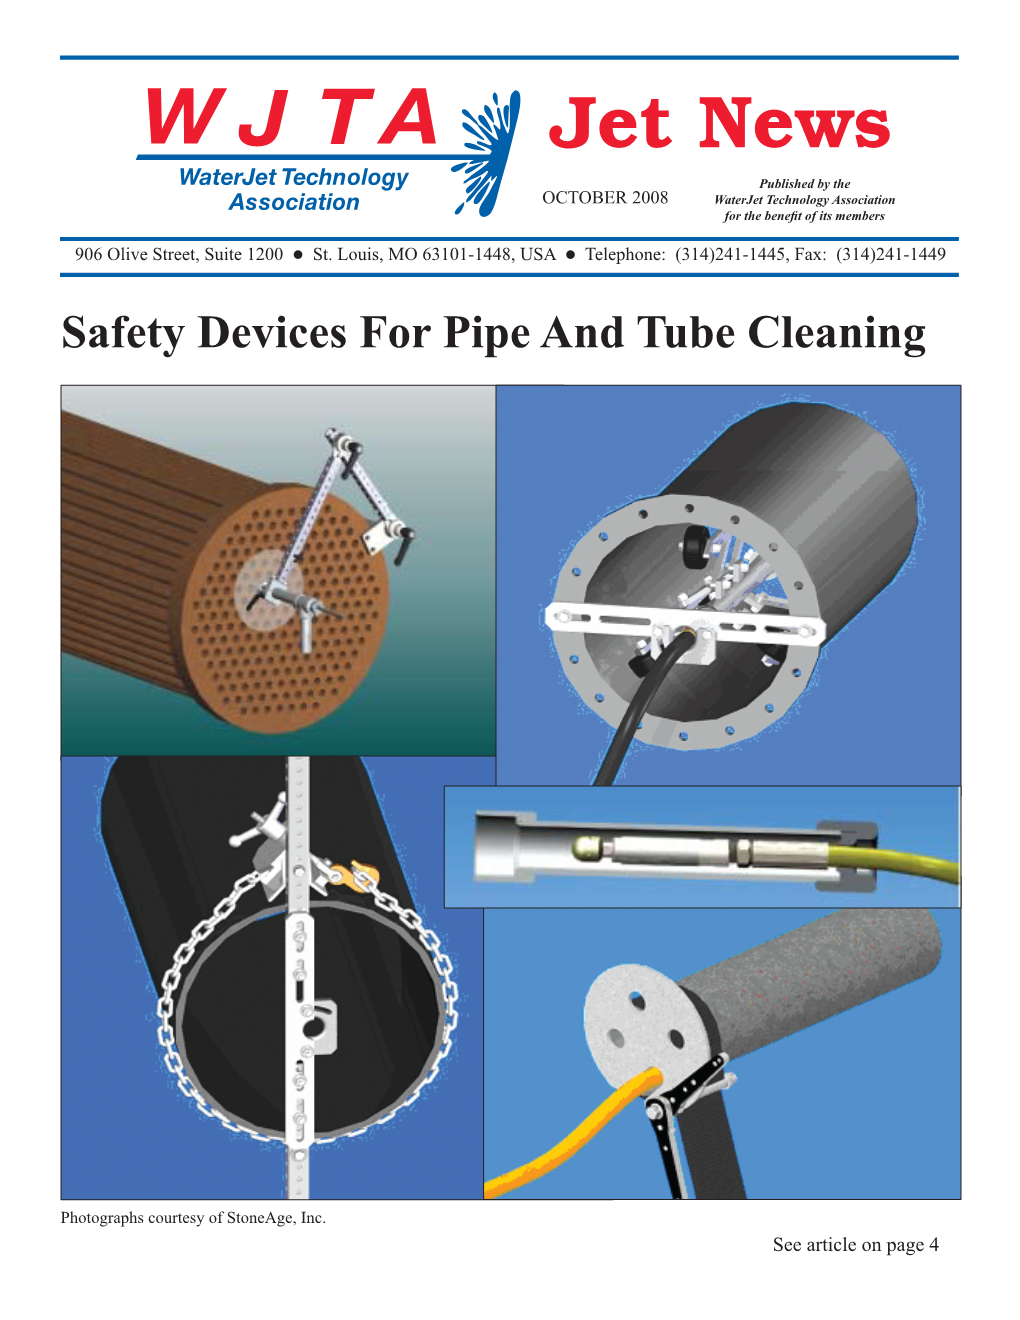 Safety Devices for Pipe and Tube Cleaning